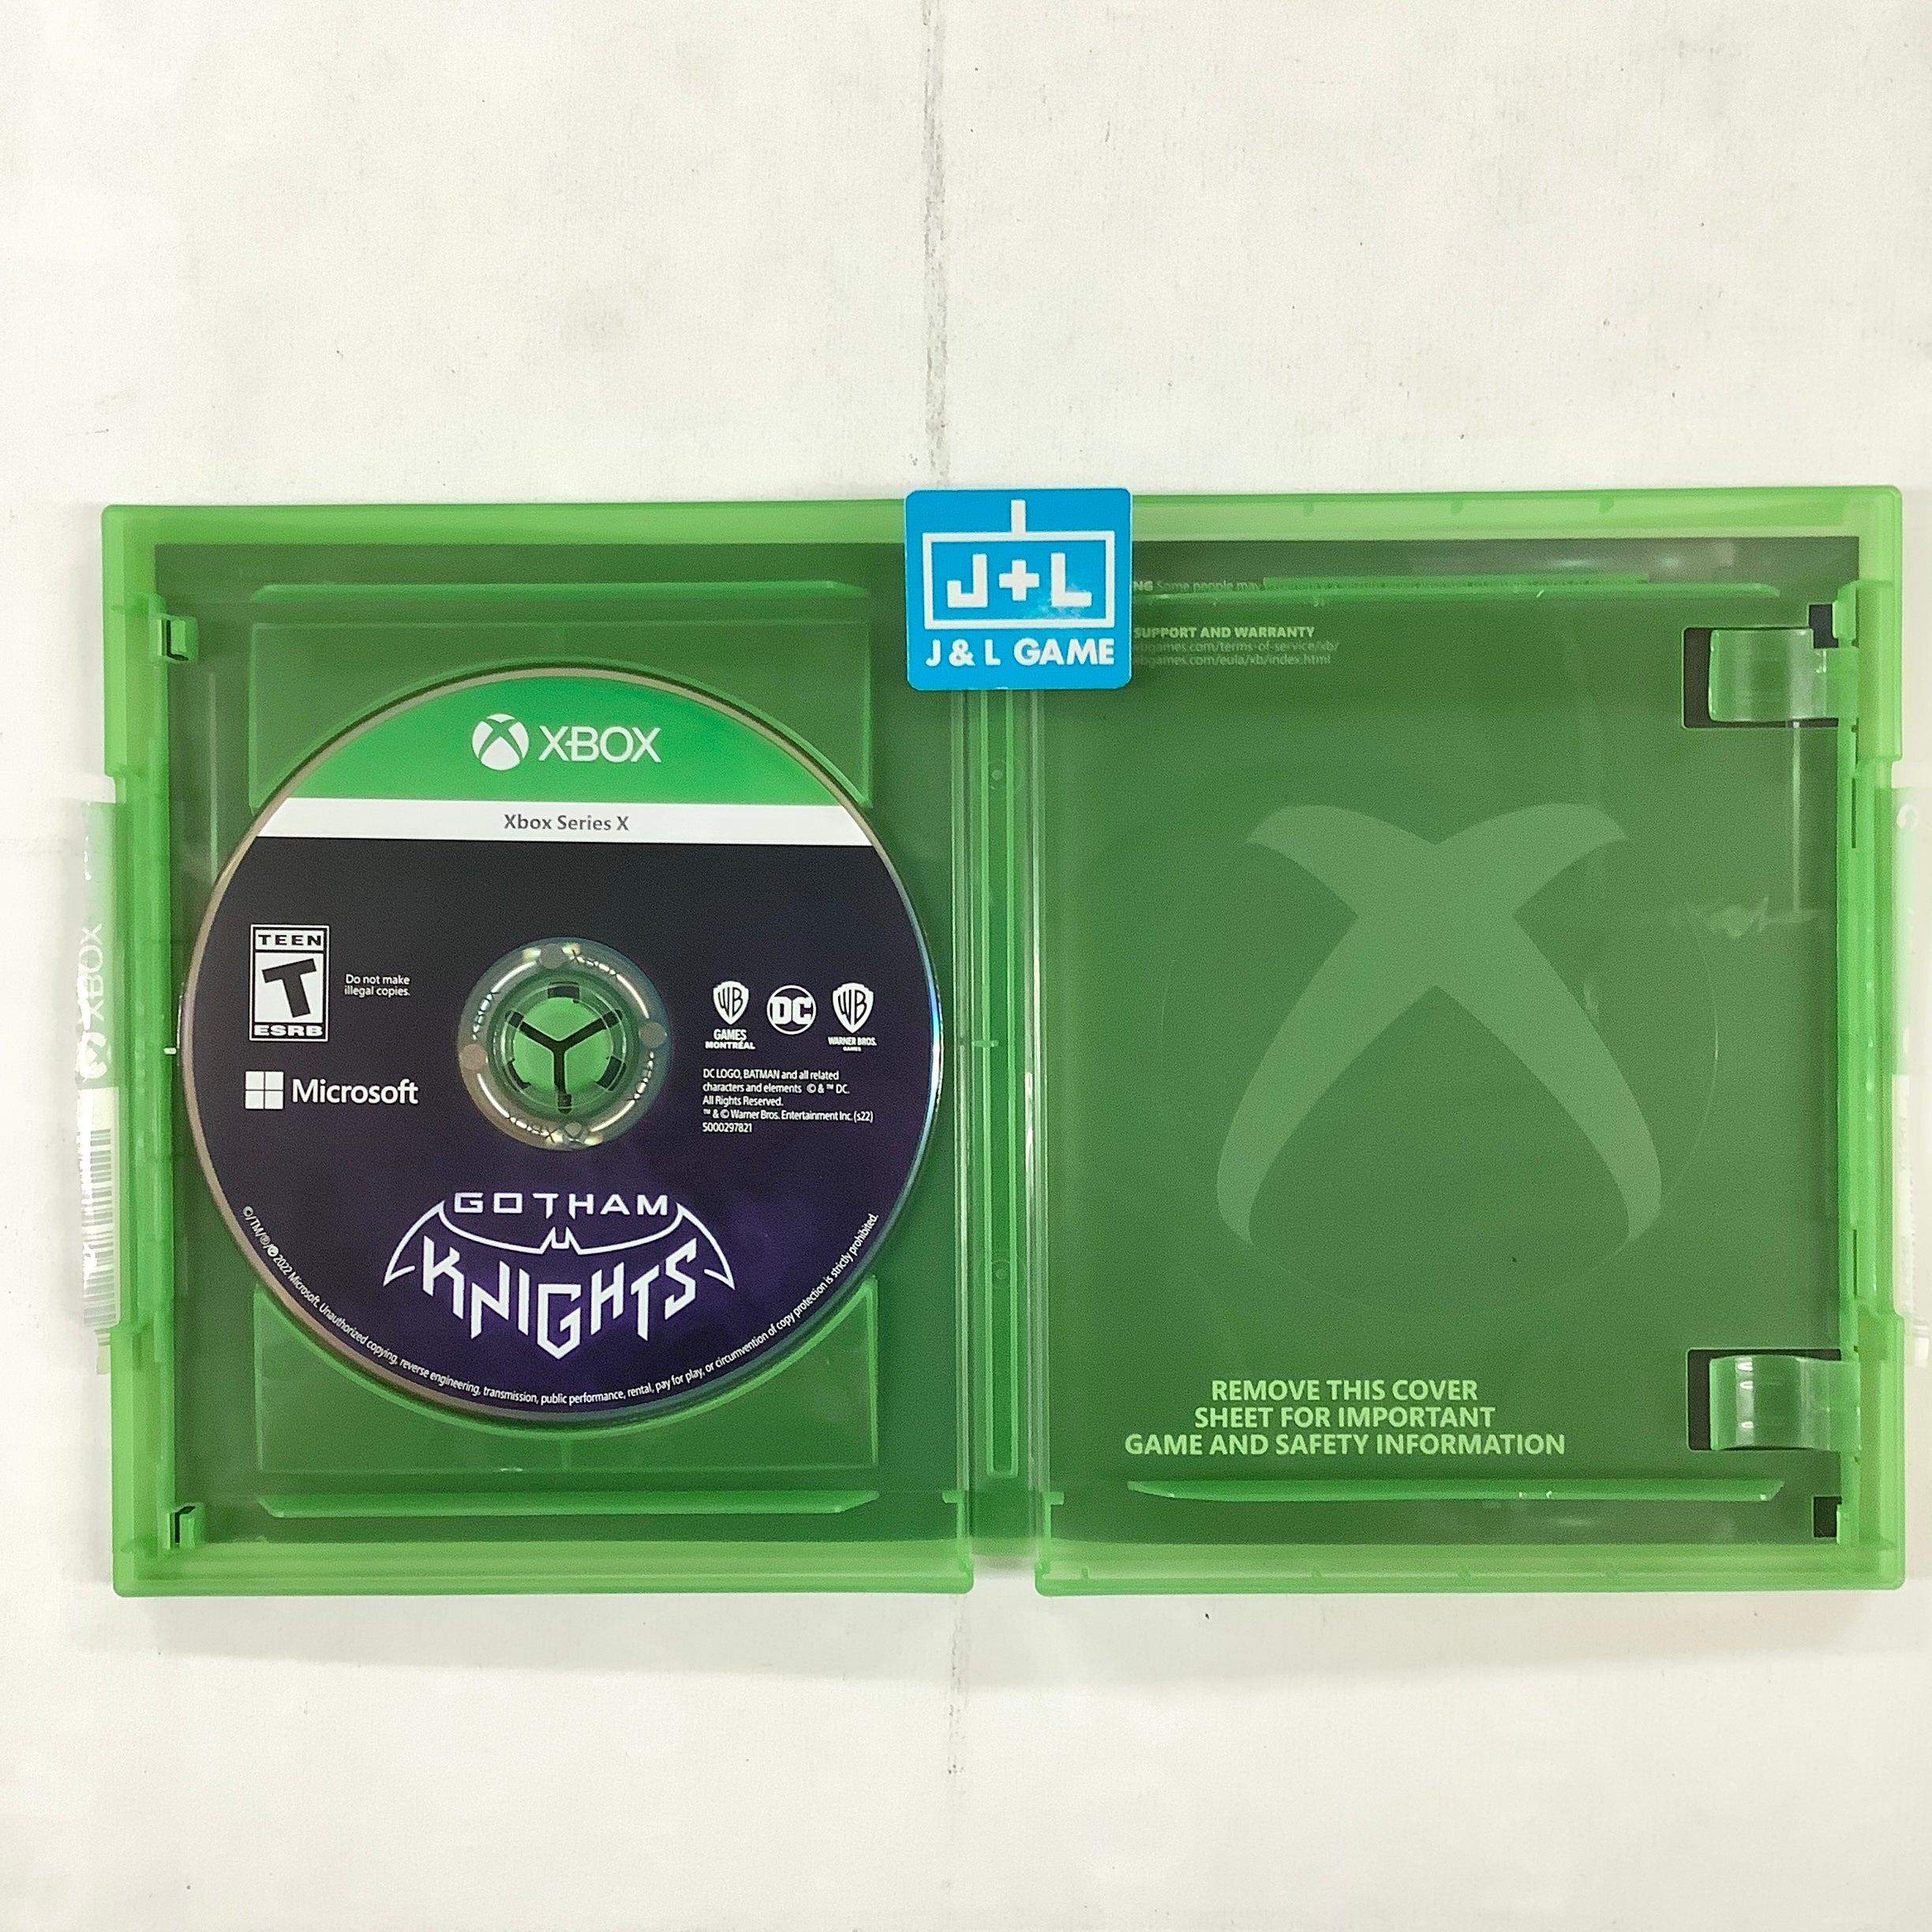 Gotham Knights - (XSX) Xbox Series X [UNBOXING] Video Games WB Games   